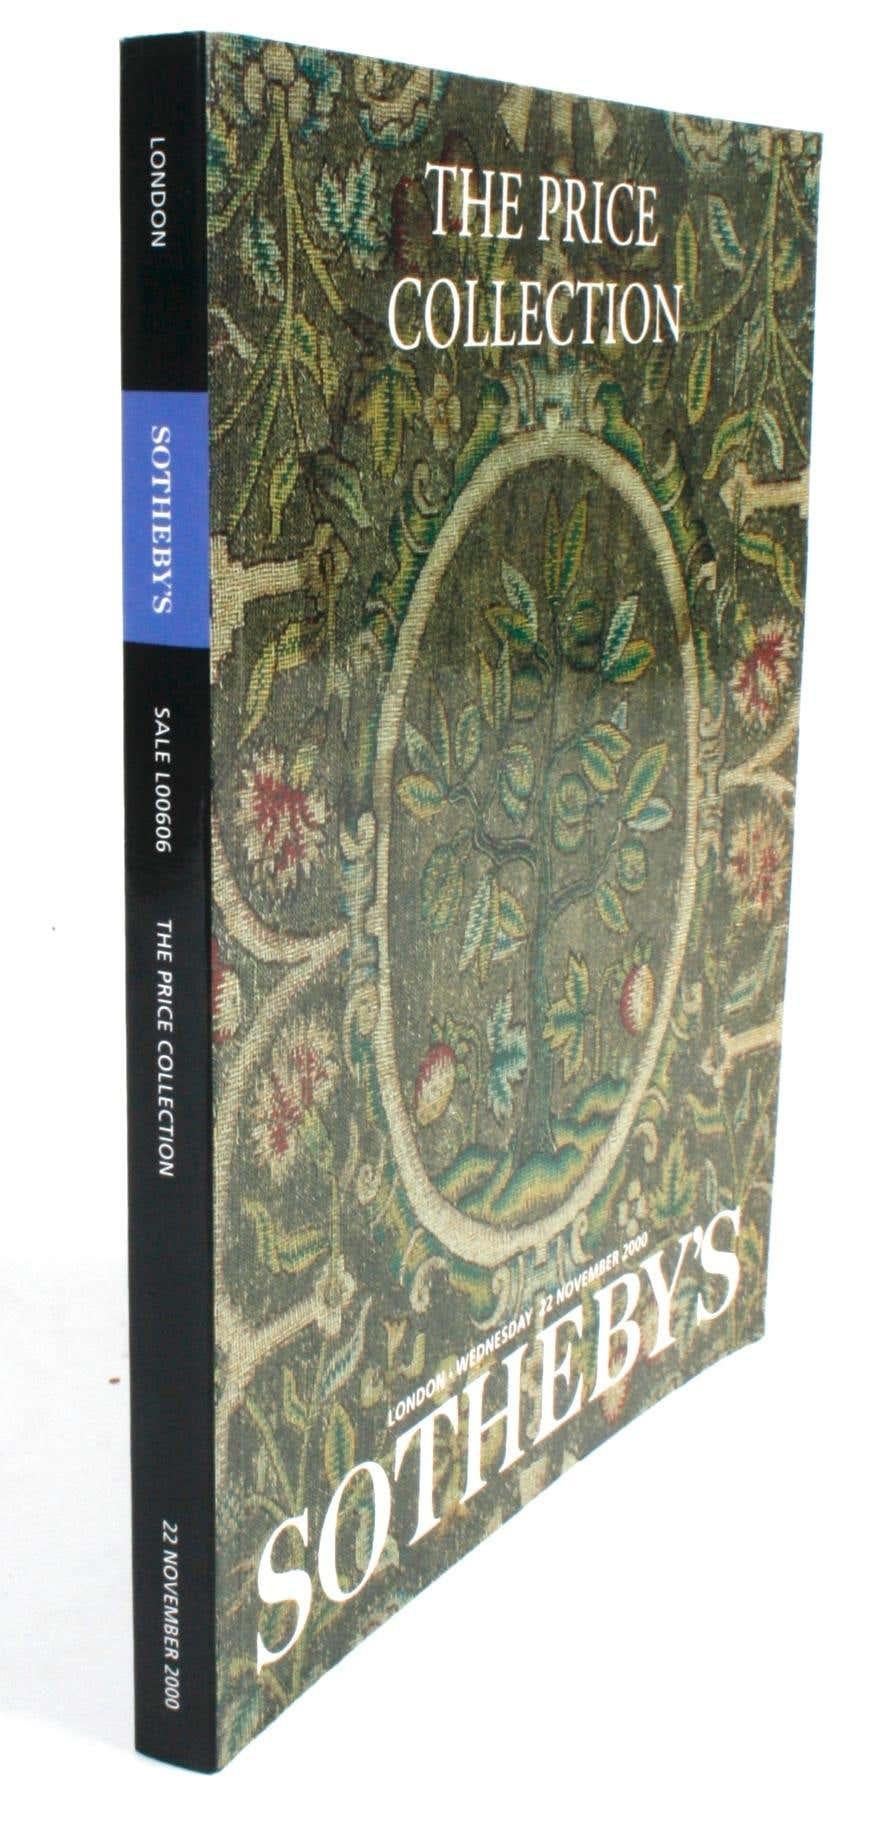 Sotheby's London; The Price Collection. London: Sotheby's, 2000. Soft cover. 260 pp. An auction catalogue of the property of the late Sir Henry Price that was held in London on Wednesday November 22, 2000. The furniture and works of art are from his